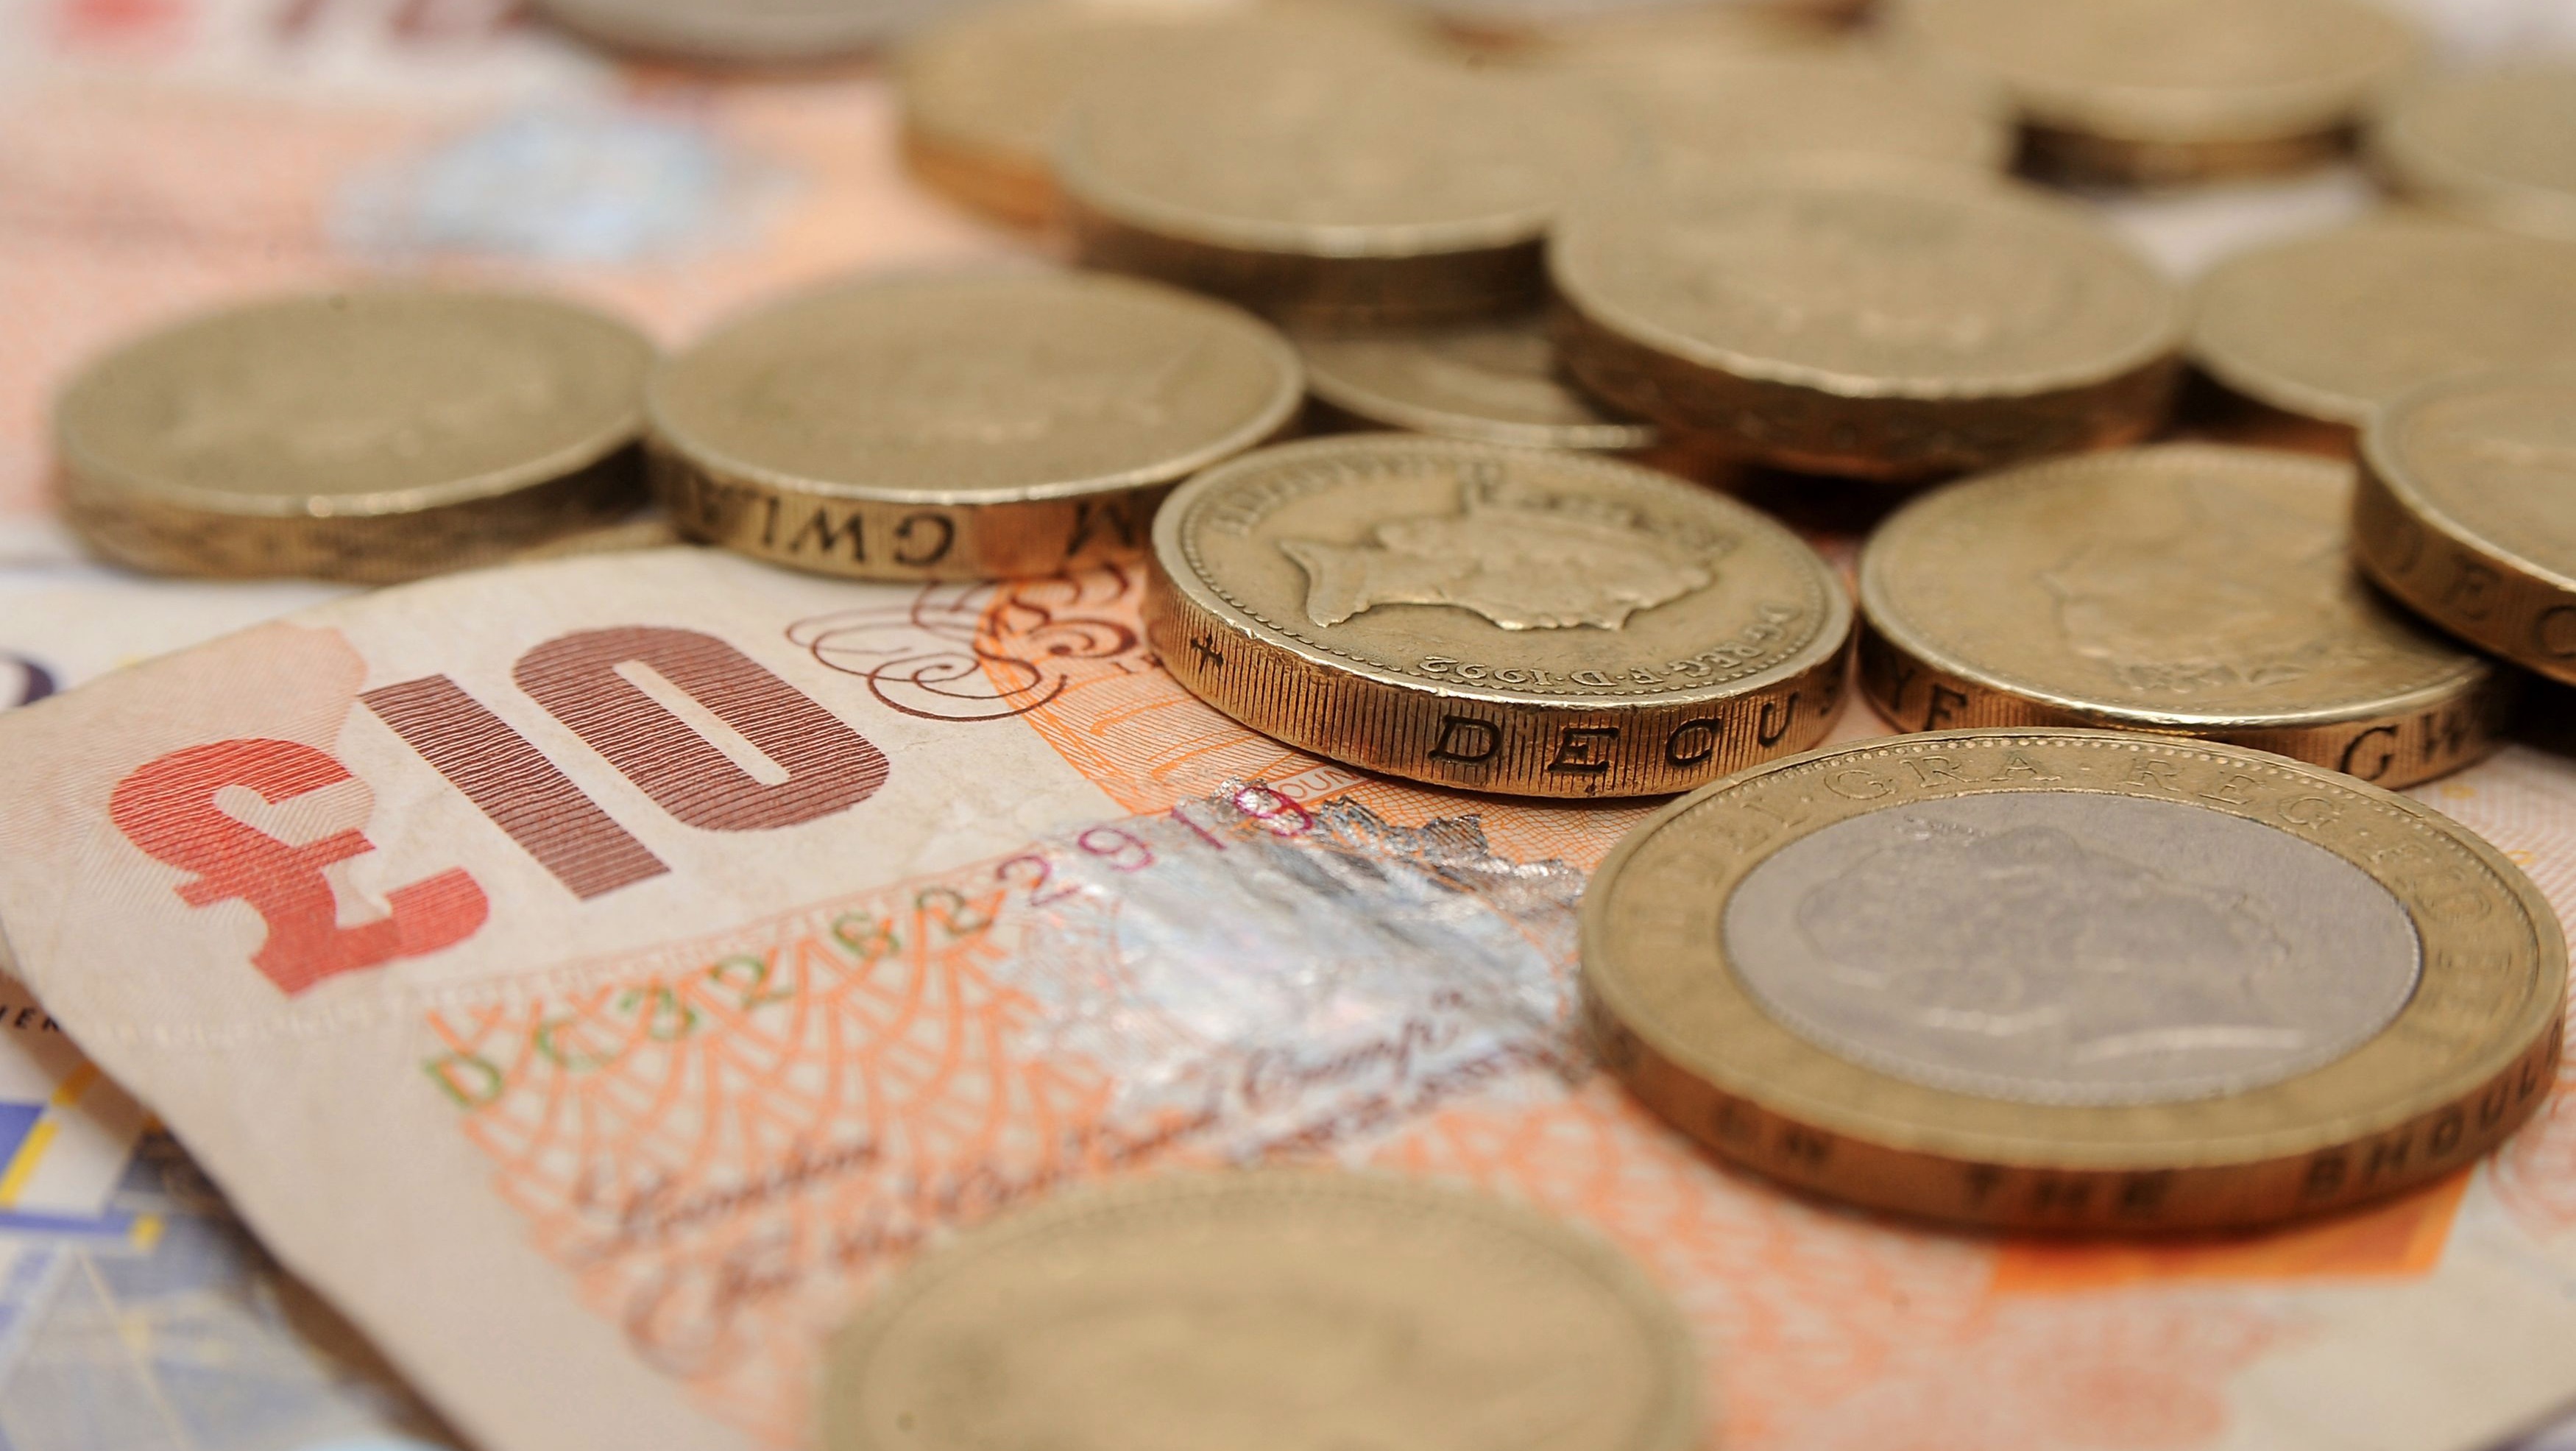 Over 75 Of Female Part Time Workers Earn Less Than Living Wage In The West Midlands Itv News